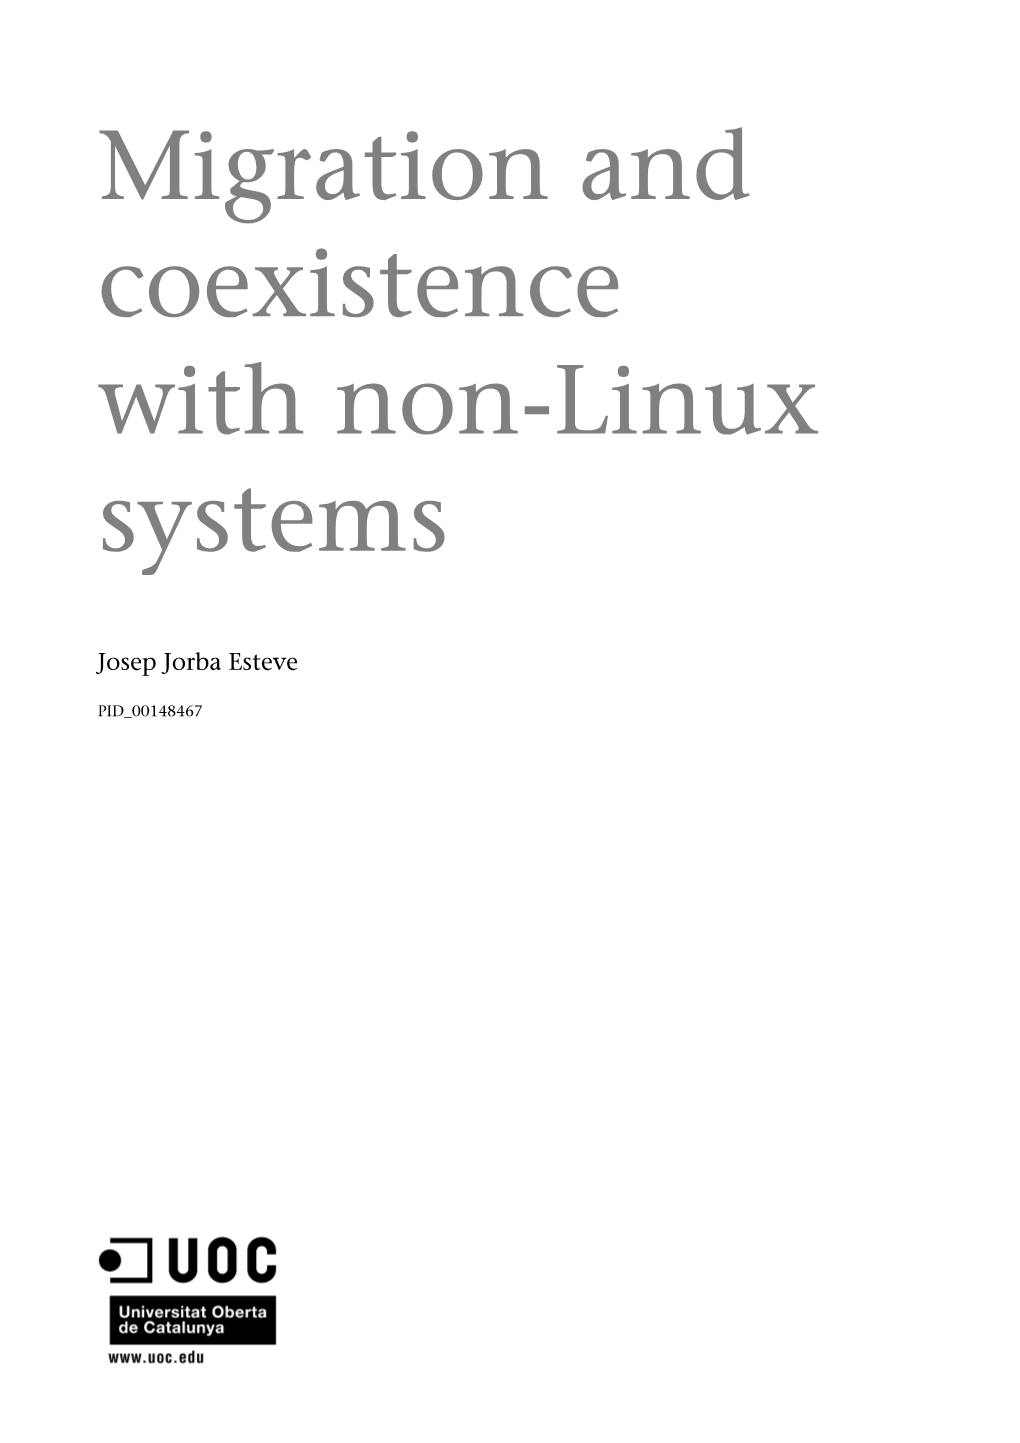 Advanced Administration of the Gnulinux Operating System